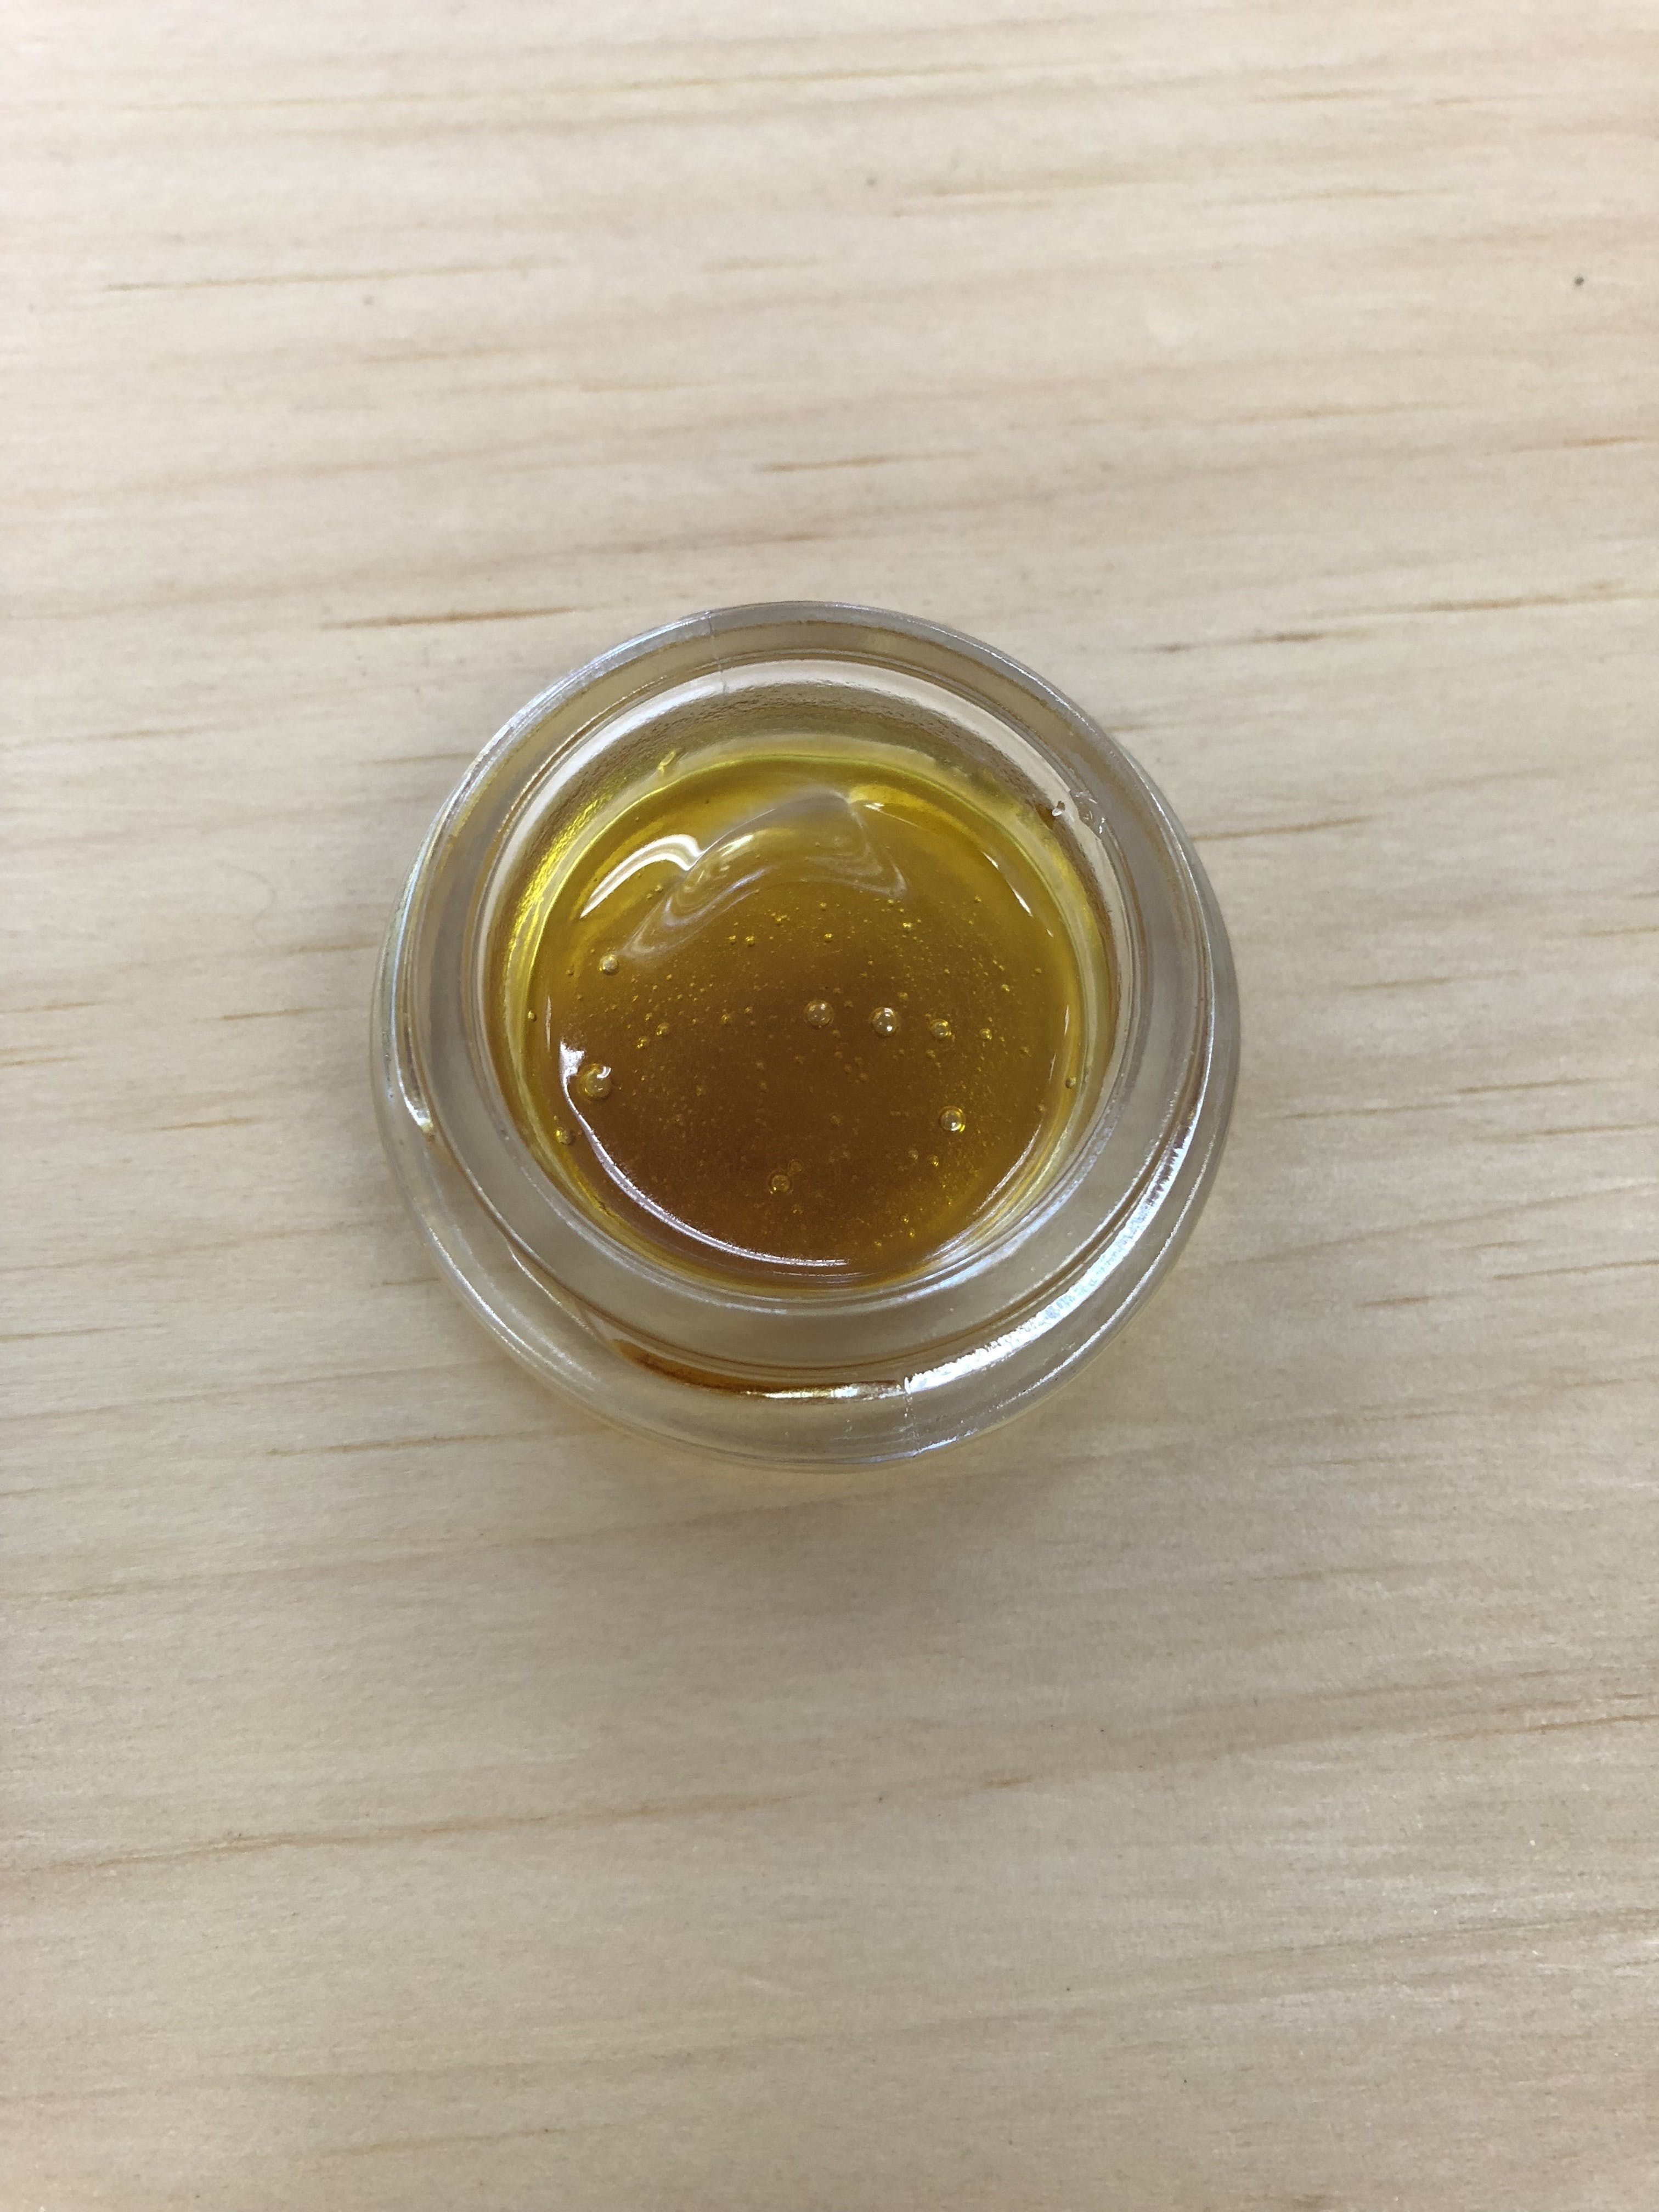 concentrate-co2-full-spectrum-dab-oil